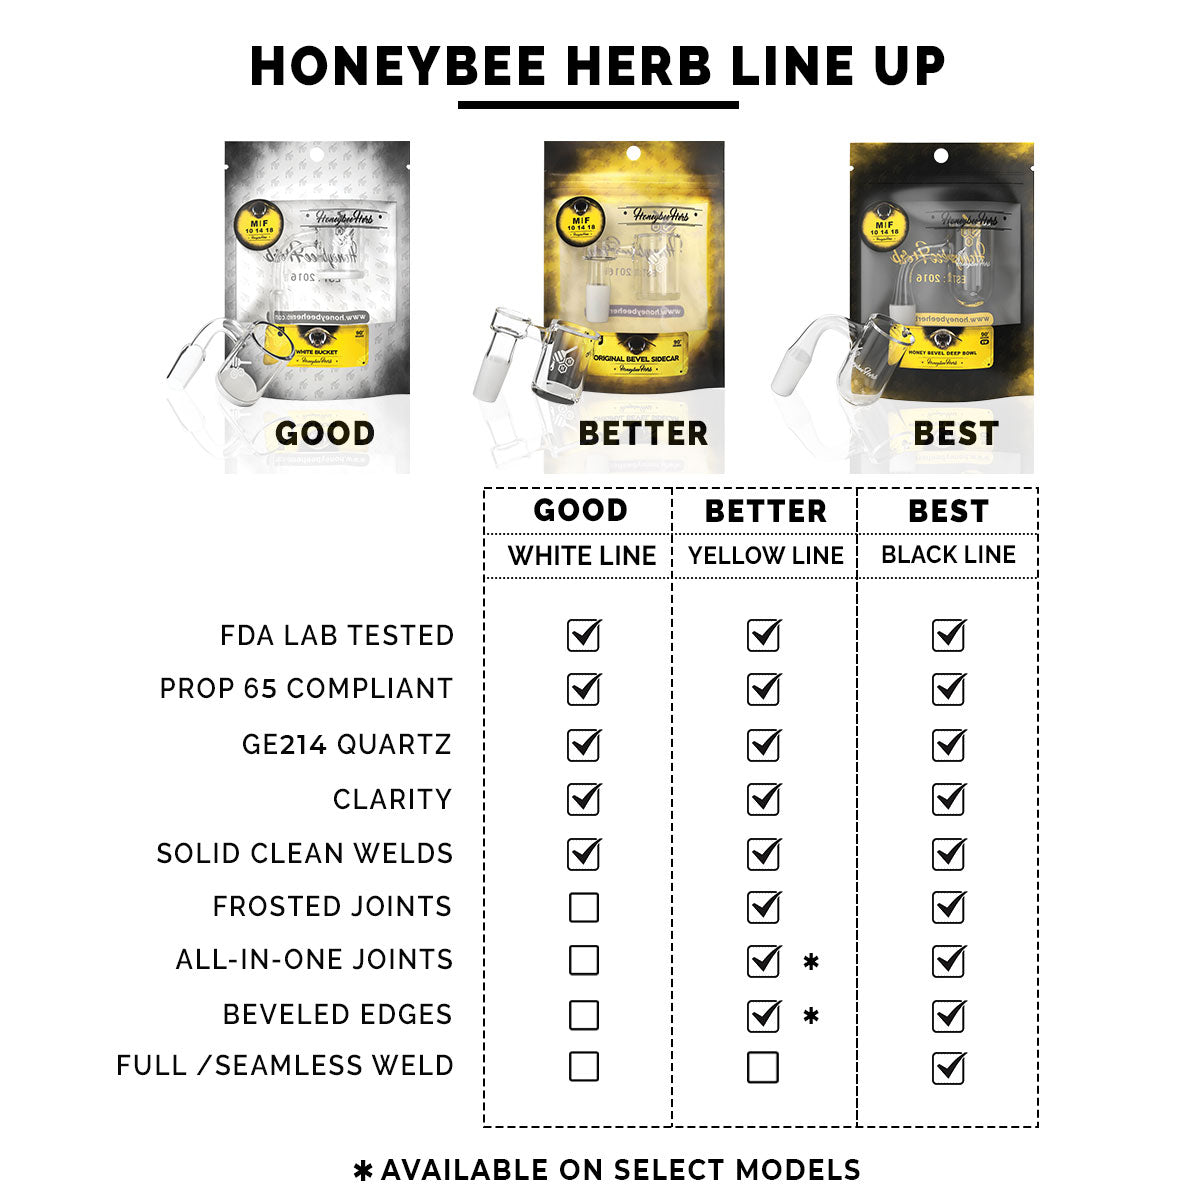 Honeybee Herb Quartz Bangers comparison chart, showcasing product quality tiers from good to best.